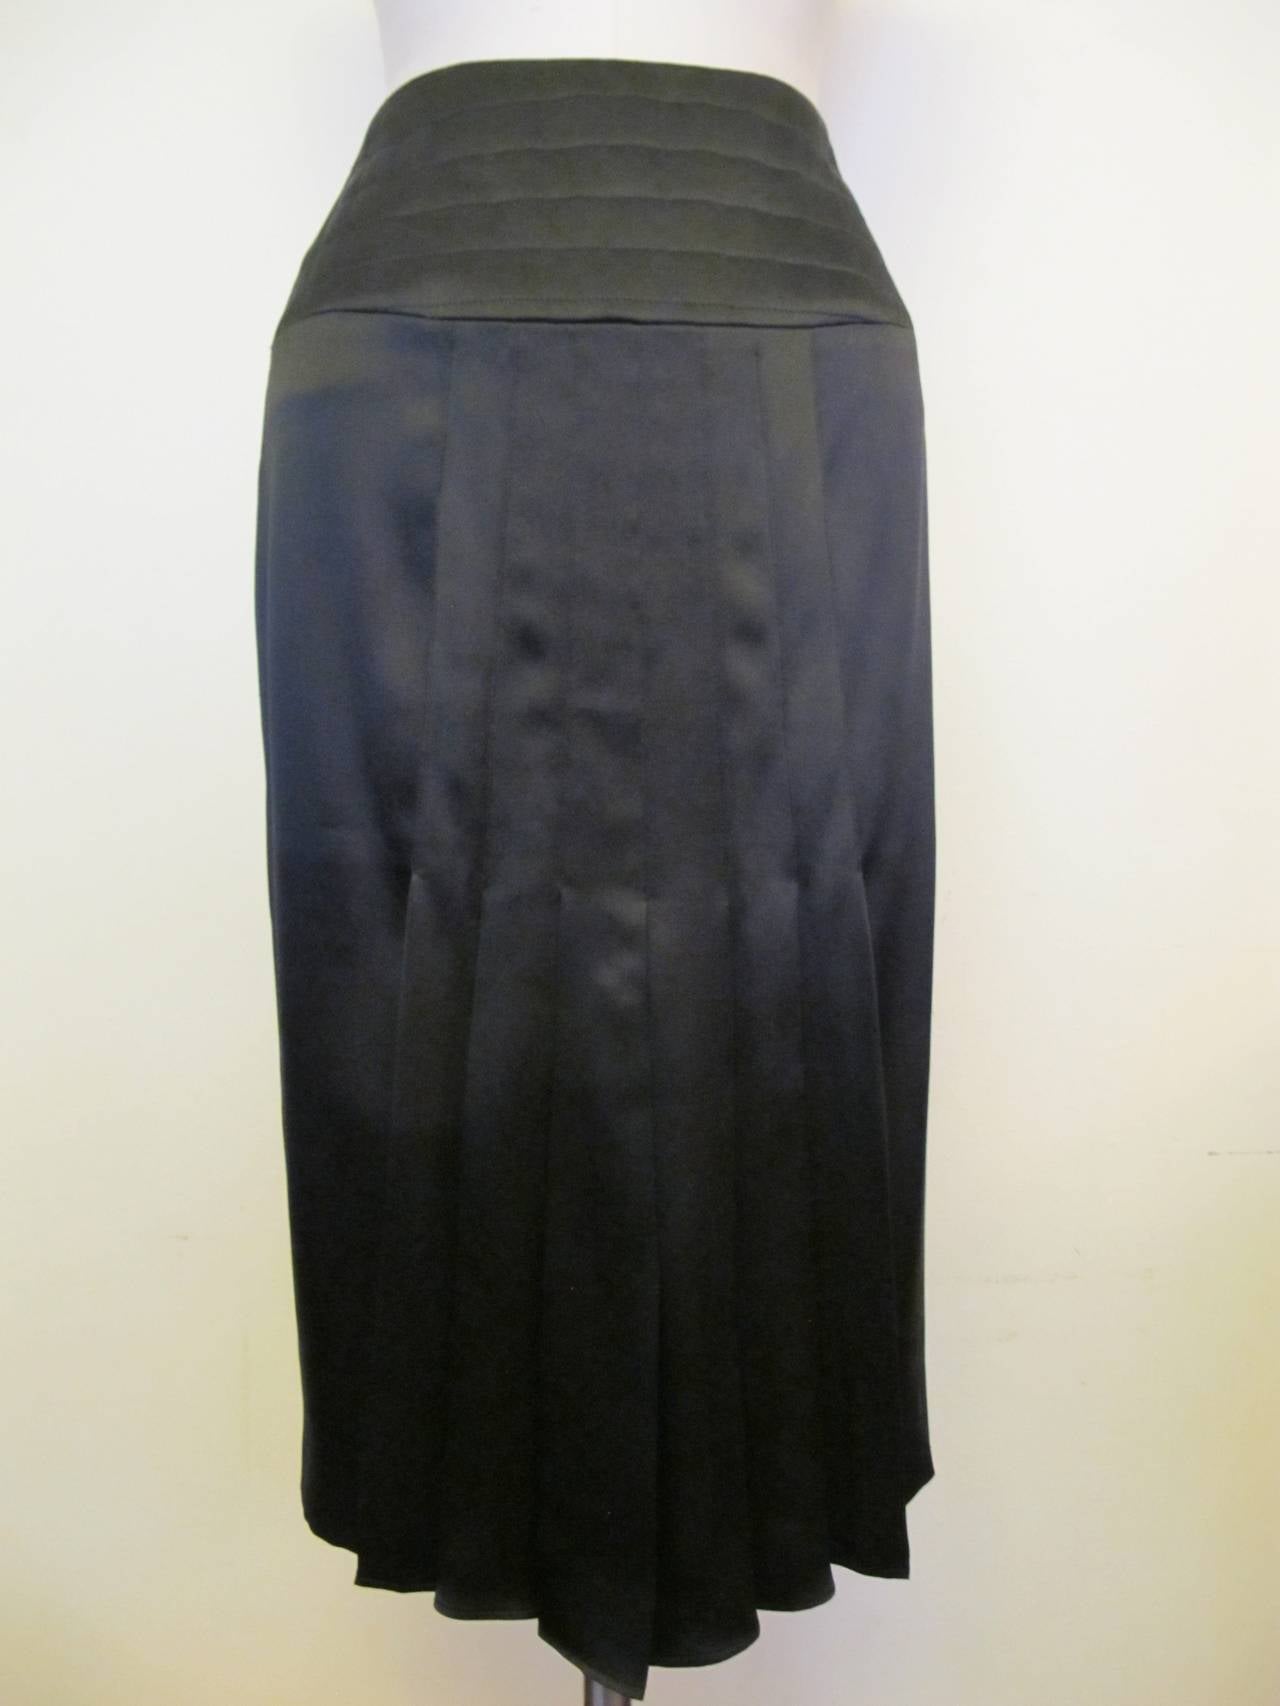 Chanel Black Satin Skirt with Iconic Black Quilting on Top of Skirt In Excellent Condition For Sale In San Francisco, CA